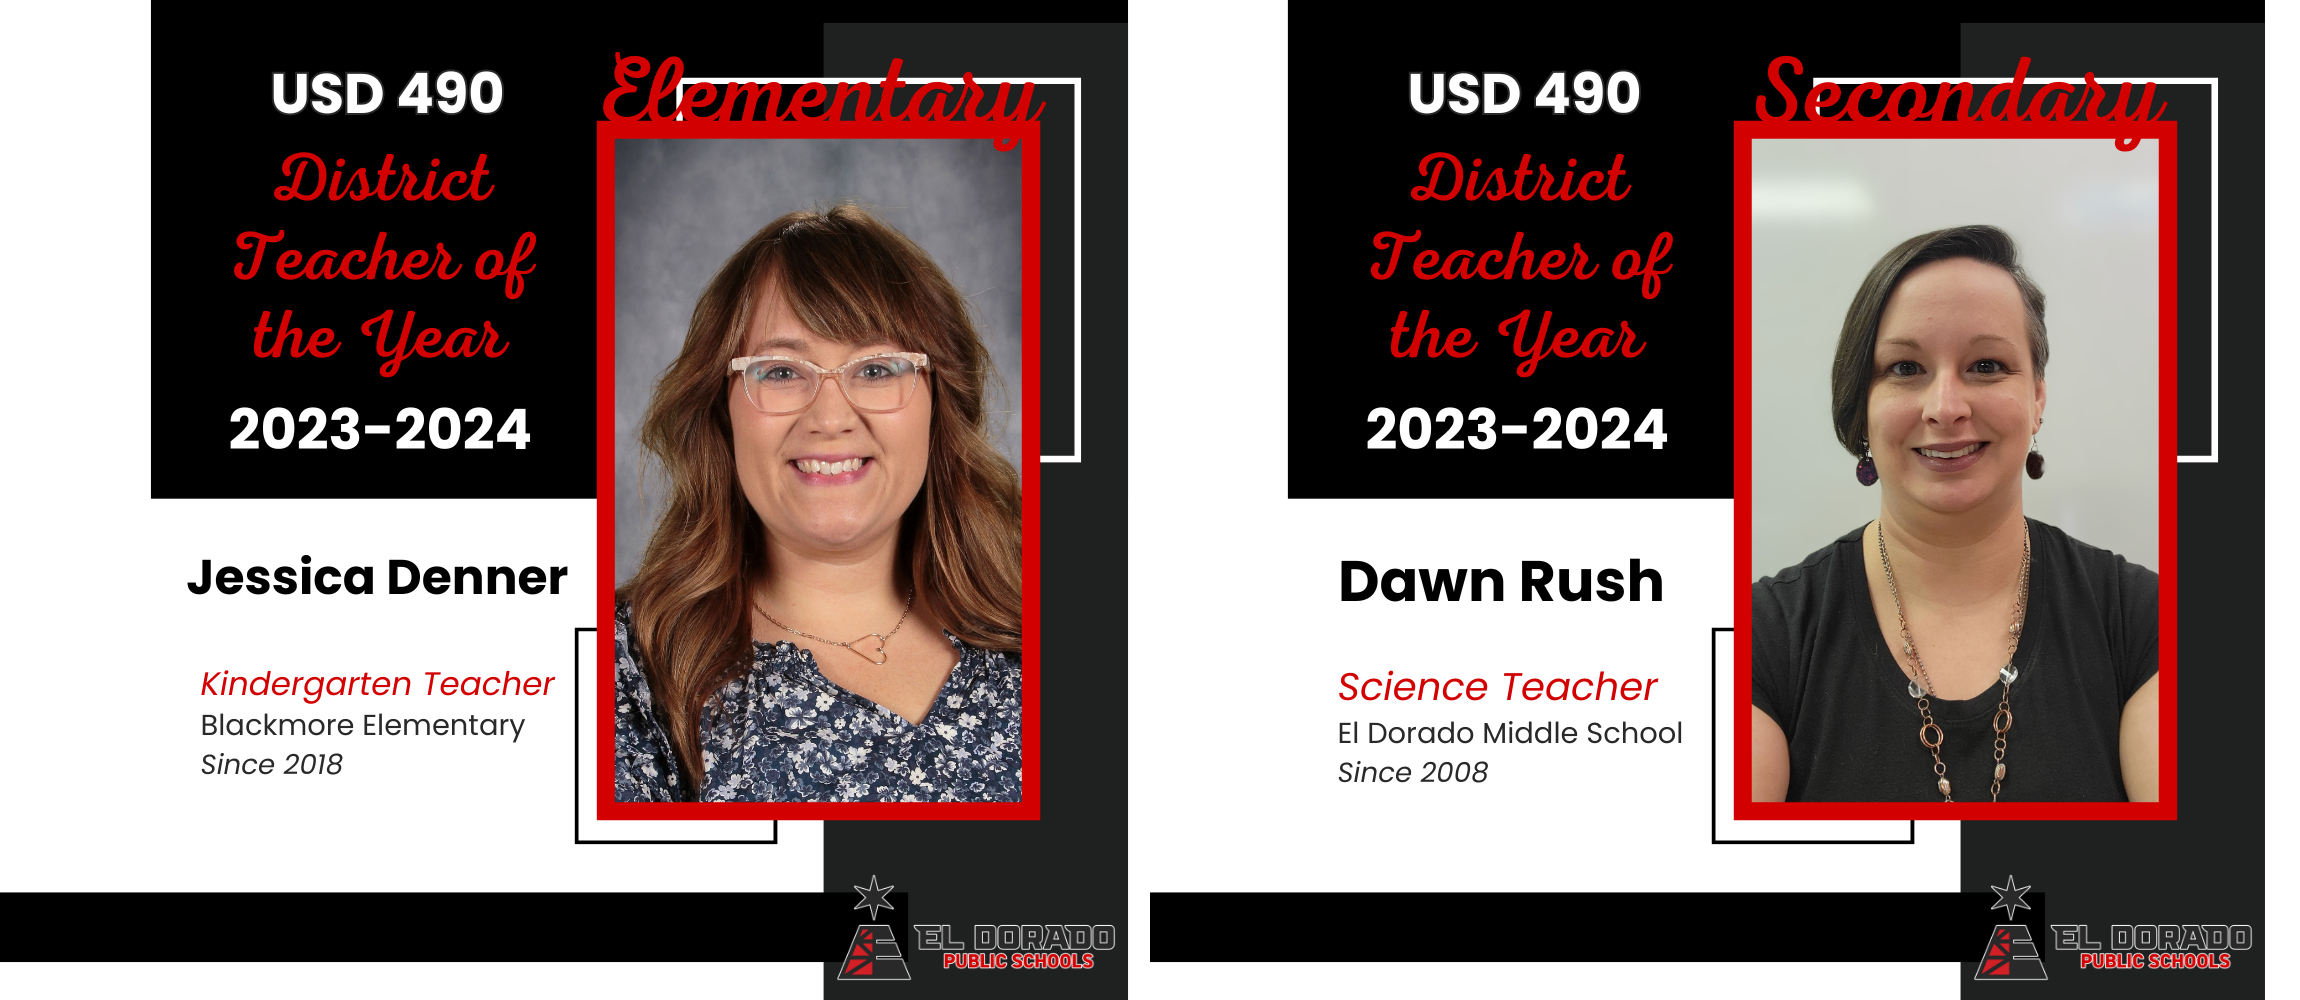 Denner and Rush 2023 District Teachers of the Year